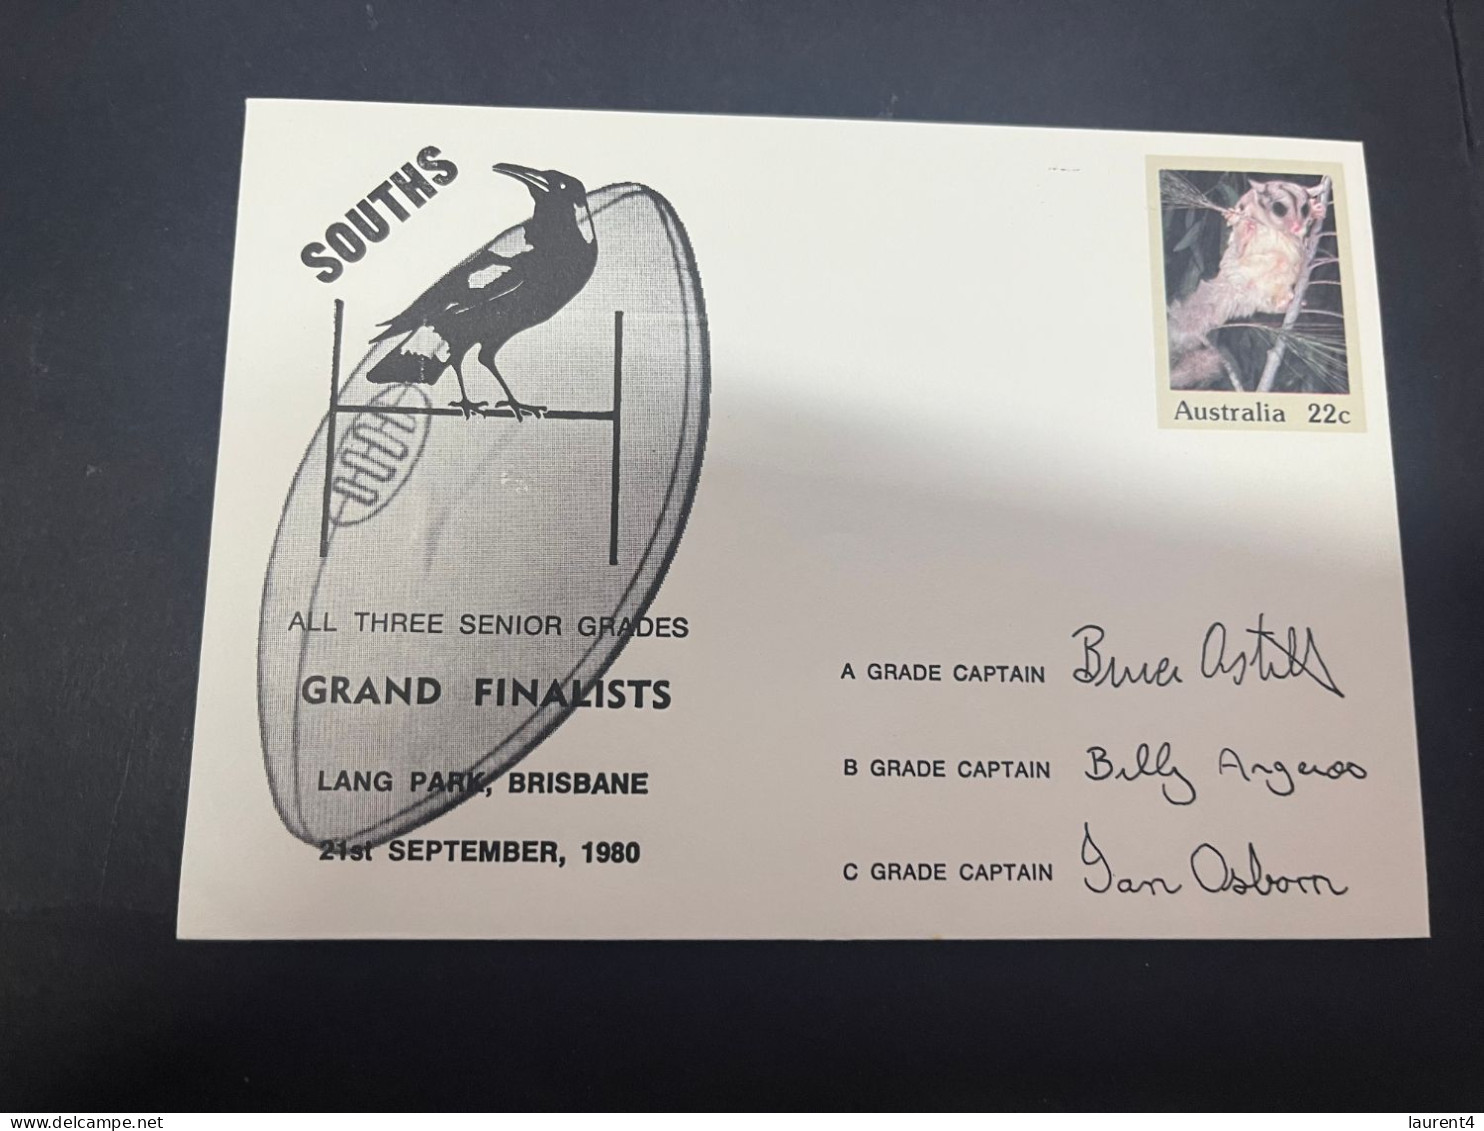 1-5-2023 (3 Z 39) Australia FDC (1 Covers) 1980 - OZ Football - South (magpies) Grand Finalists (signed - Sugar Glider) - FDC